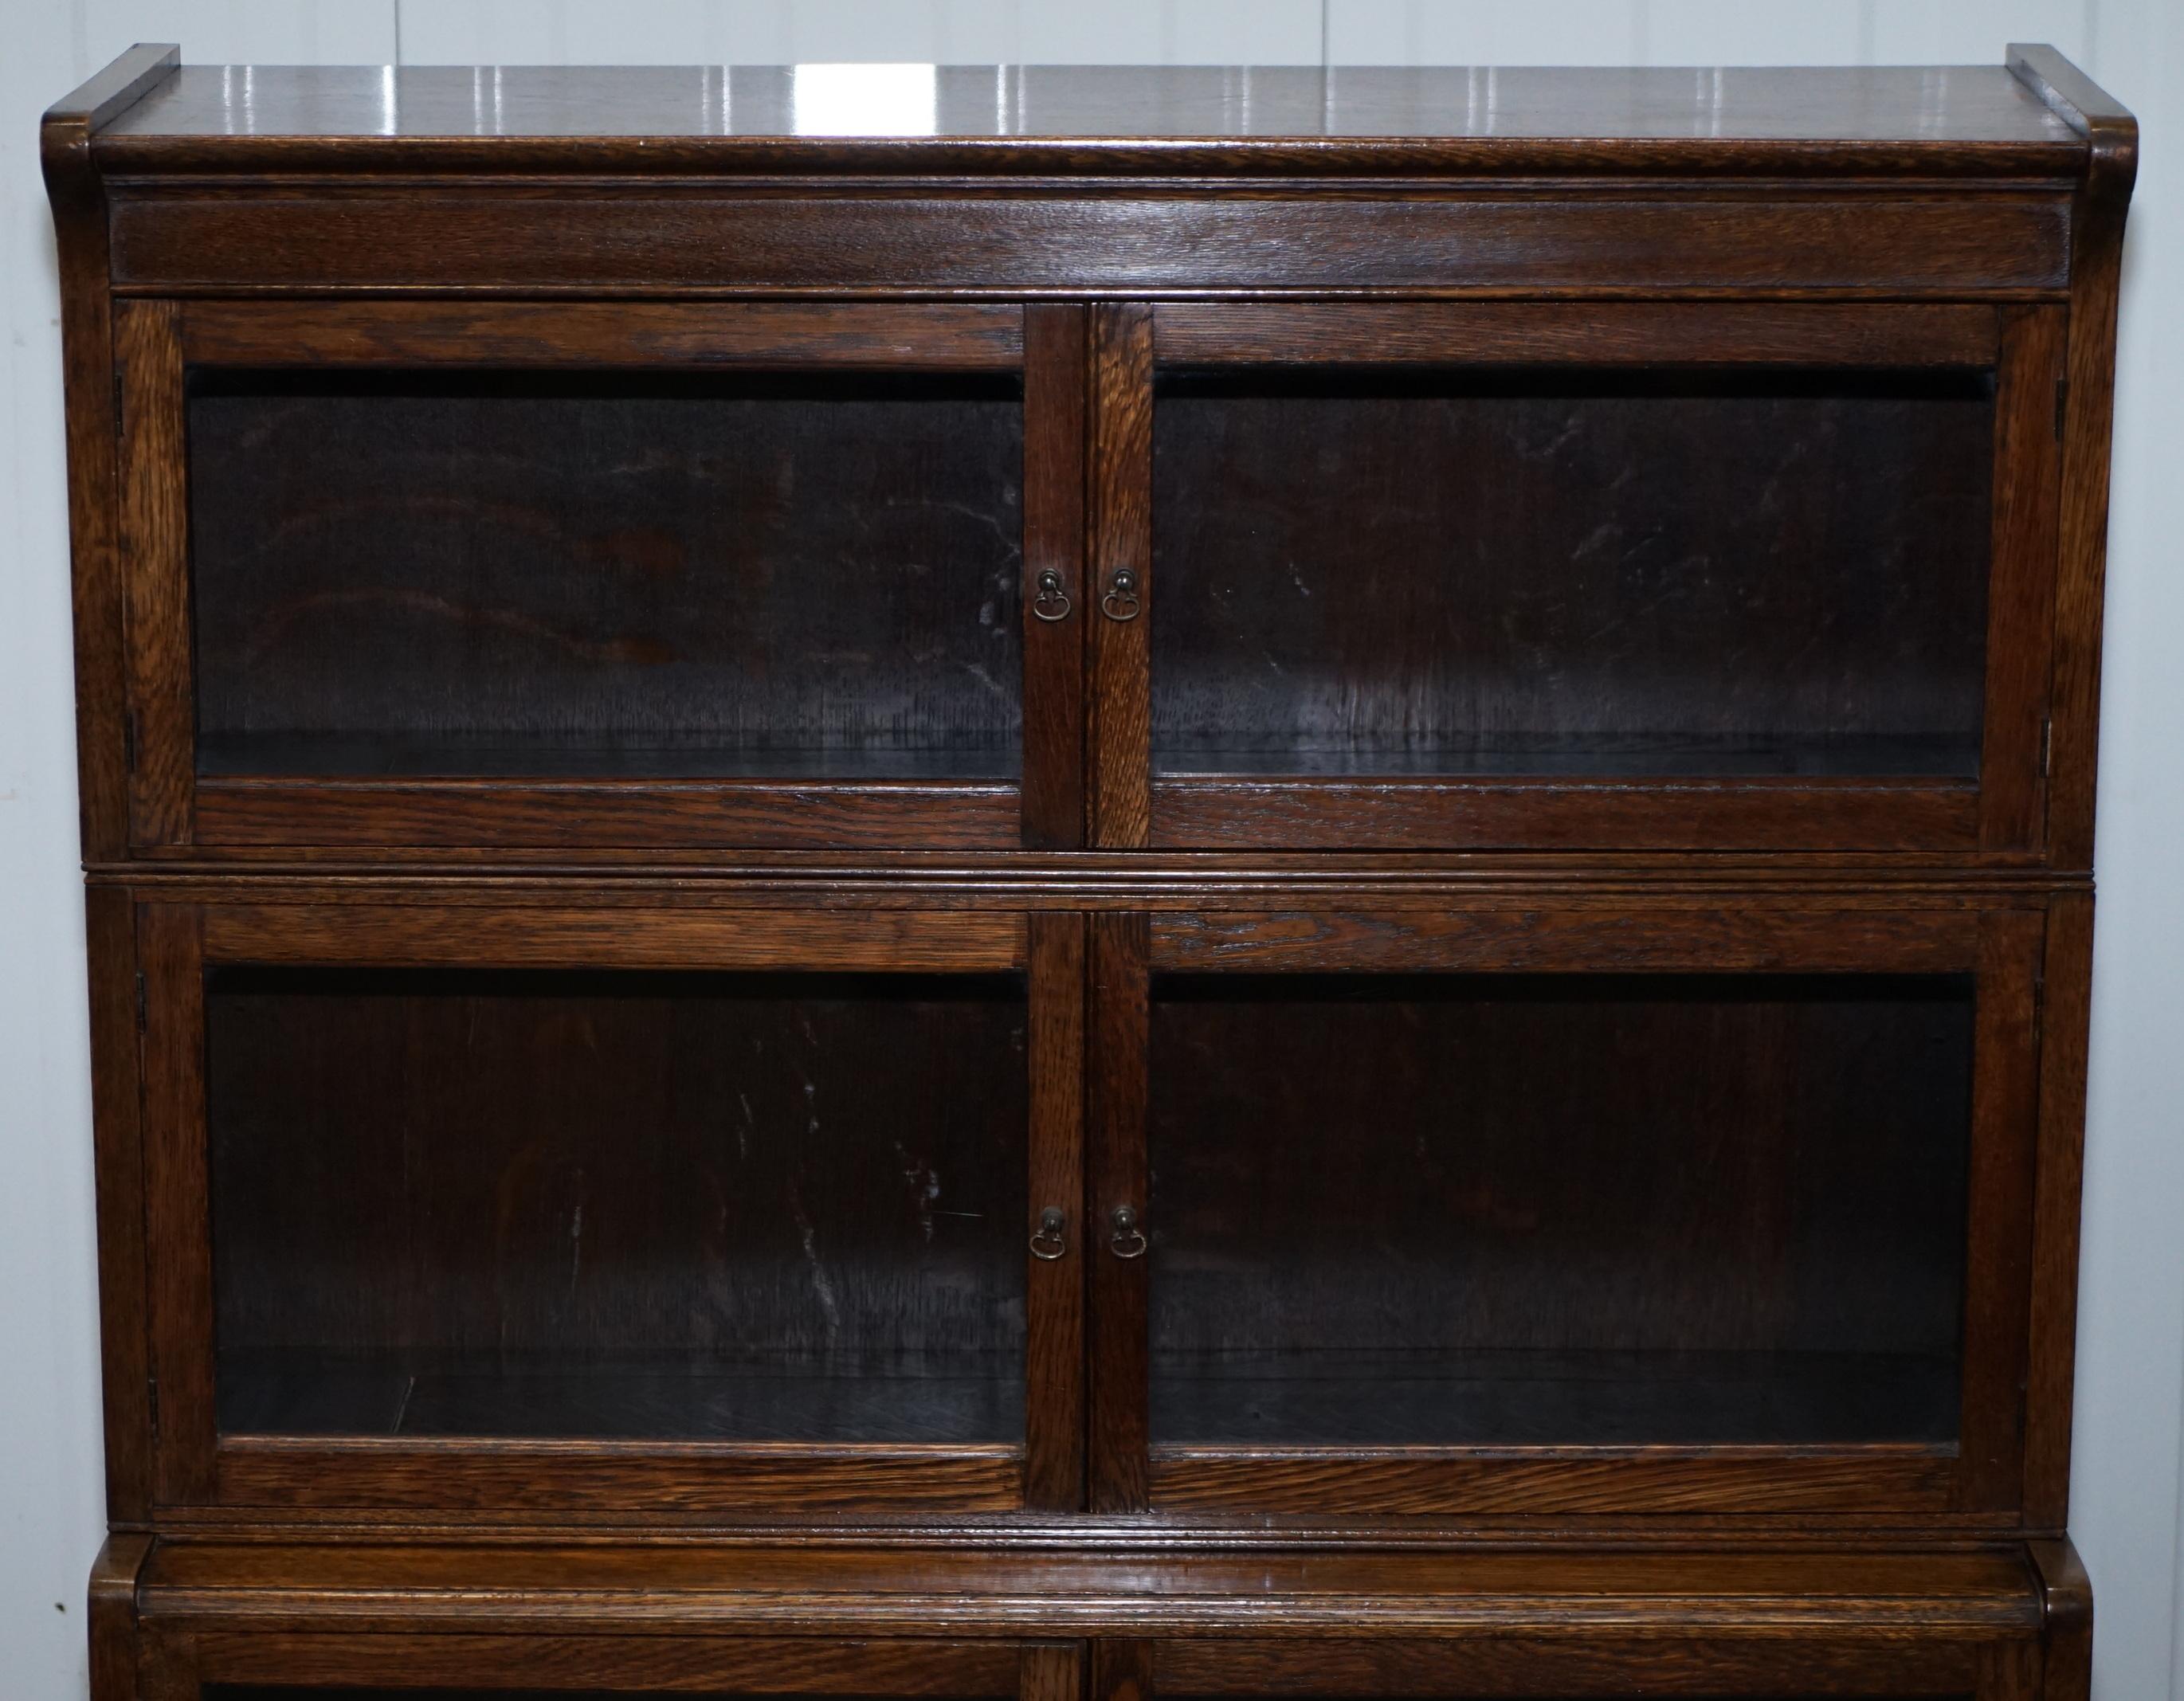 Hand-Crafted Original Pair of circa 1900 William Baker Co Oxford Stacking Modular Bookcases